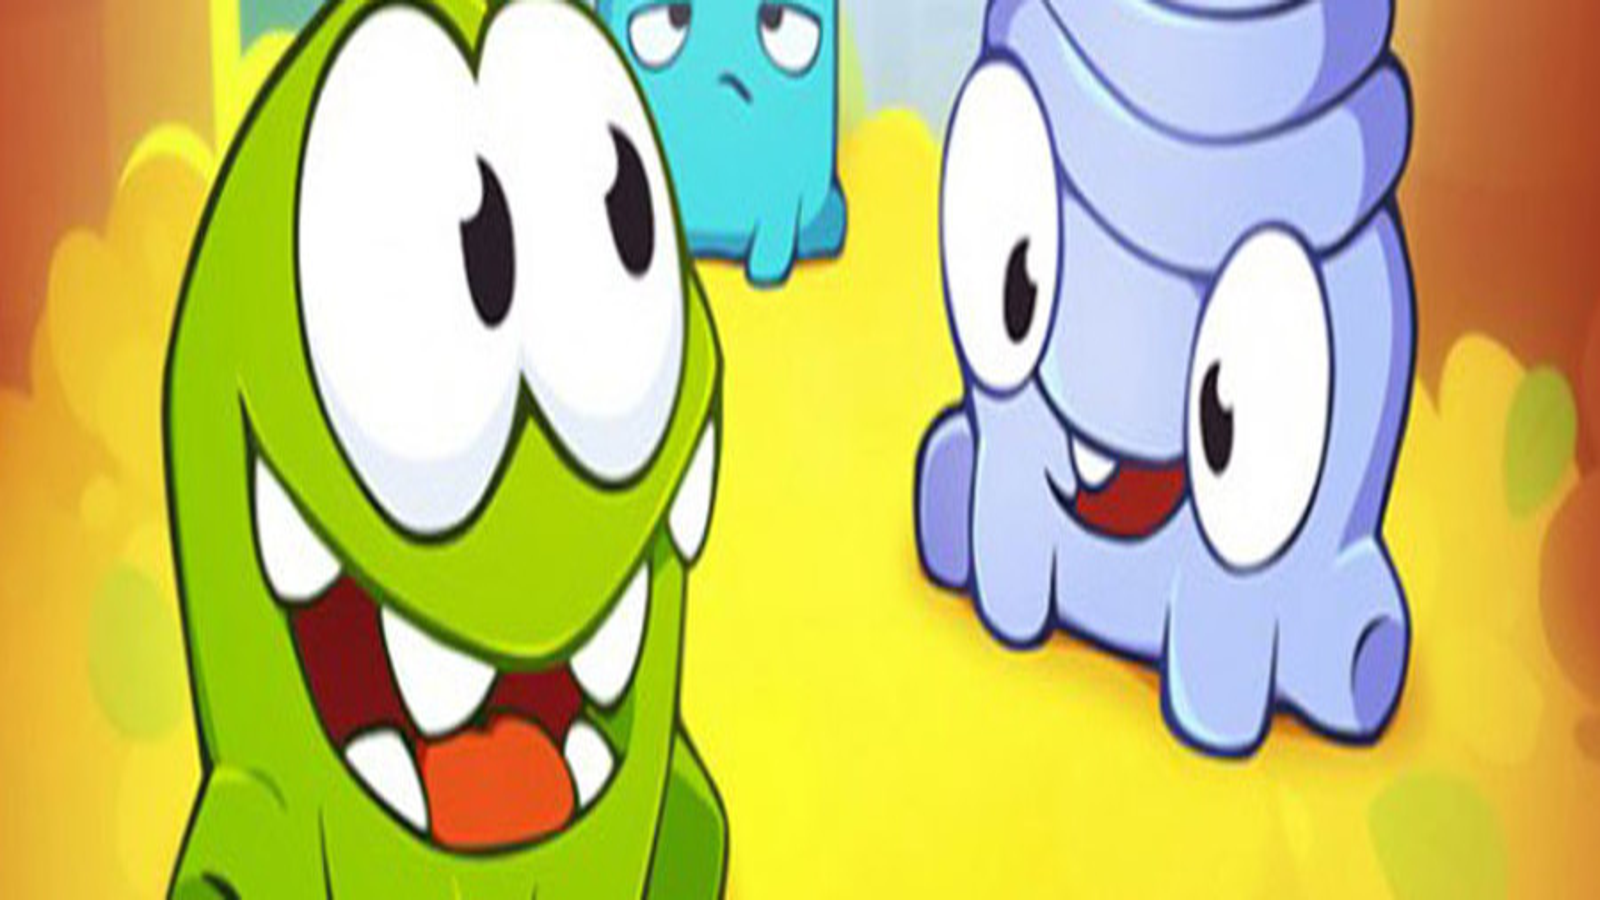 Cut The Rope 2 Coming To iOS This Month - Game Informer